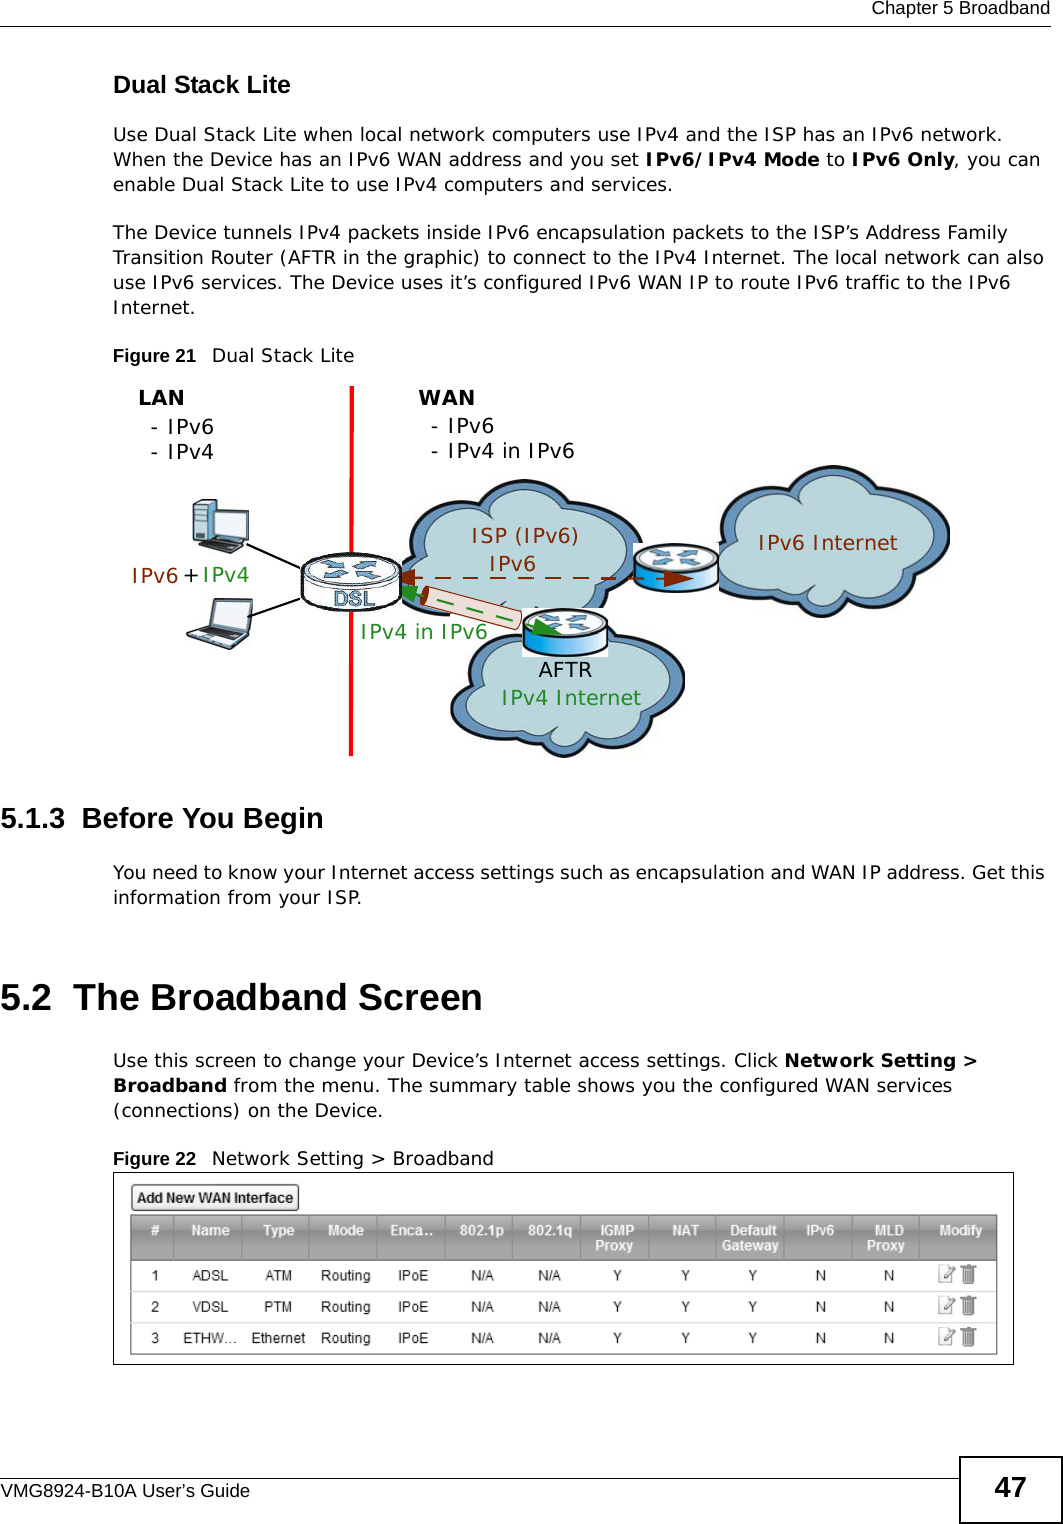  Chapter 5 BroadbandVMG8924-B10A User’s Guide 47Dual Stack Lite   Use Dual Stack Lite when local network computers use IPv4 and the ISP has an IPv6 network. When the Device has an IPv6 WAN address and you set IPv6/IPv4 Mode to IPv6 Only, you can enable Dual Stack Lite to use IPv4 computers and services. The Device tunnels IPv4 packets inside IPv6 encapsulation packets to the ISP’s Address Family Transition Router (AFTR in the graphic) to connect to the IPv4 Internet. The local network can also use IPv6 services. The Device uses it’s configured IPv6 WAN IP to route IPv6 traffic to the IPv6 Internet.Figure 21   Dual Stack Lite5.1.3  Before You BeginYou need to know your Internet access settings such as encapsulation and WAN IP address. Get this information from your ISP.5.2  The Broadband ScreenUse this screen to change your Device’s Internet access settings. Click Network Setting &gt; Broadband from the menu. The summary table shows you the configured WAN services (connections) on the Device.Figure 22   Network Setting &gt; Broadband ISP (IPv6) IPv6 Internet IPv6 AFTRIPv4 in IPv6IPv4 InternetIPv6  IPv4 +LAN- IPv6- IPv4WAN- IPv6- IPv4 in IPv6